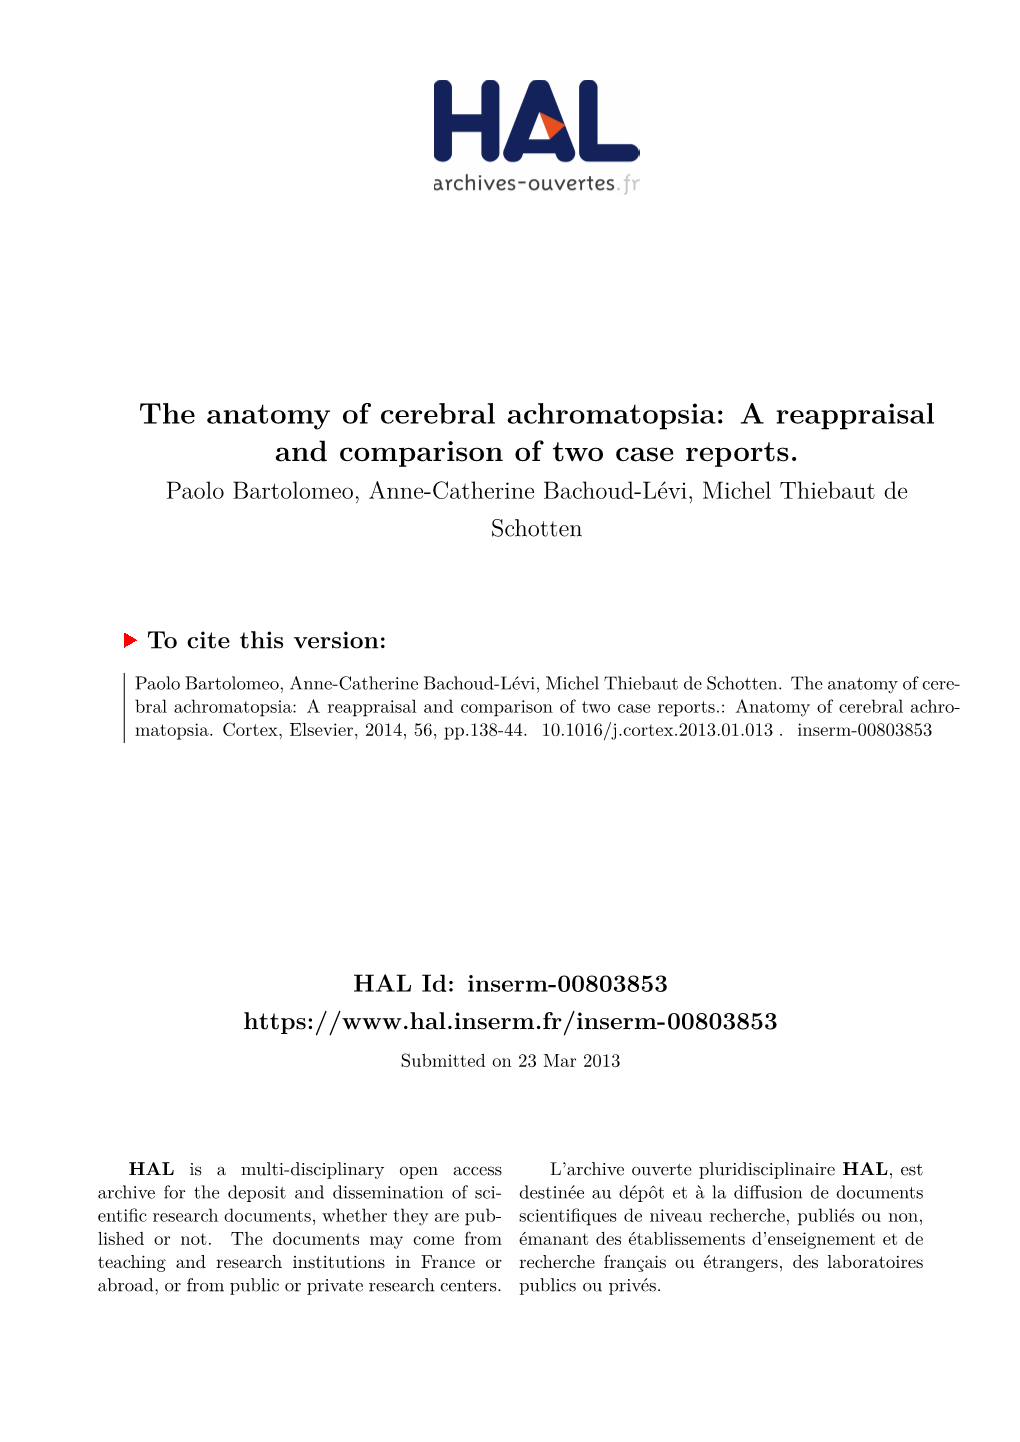 The Anatomy of Cerebral Achromatopsia: a Reappraisal and Comparison of Two Case Reports